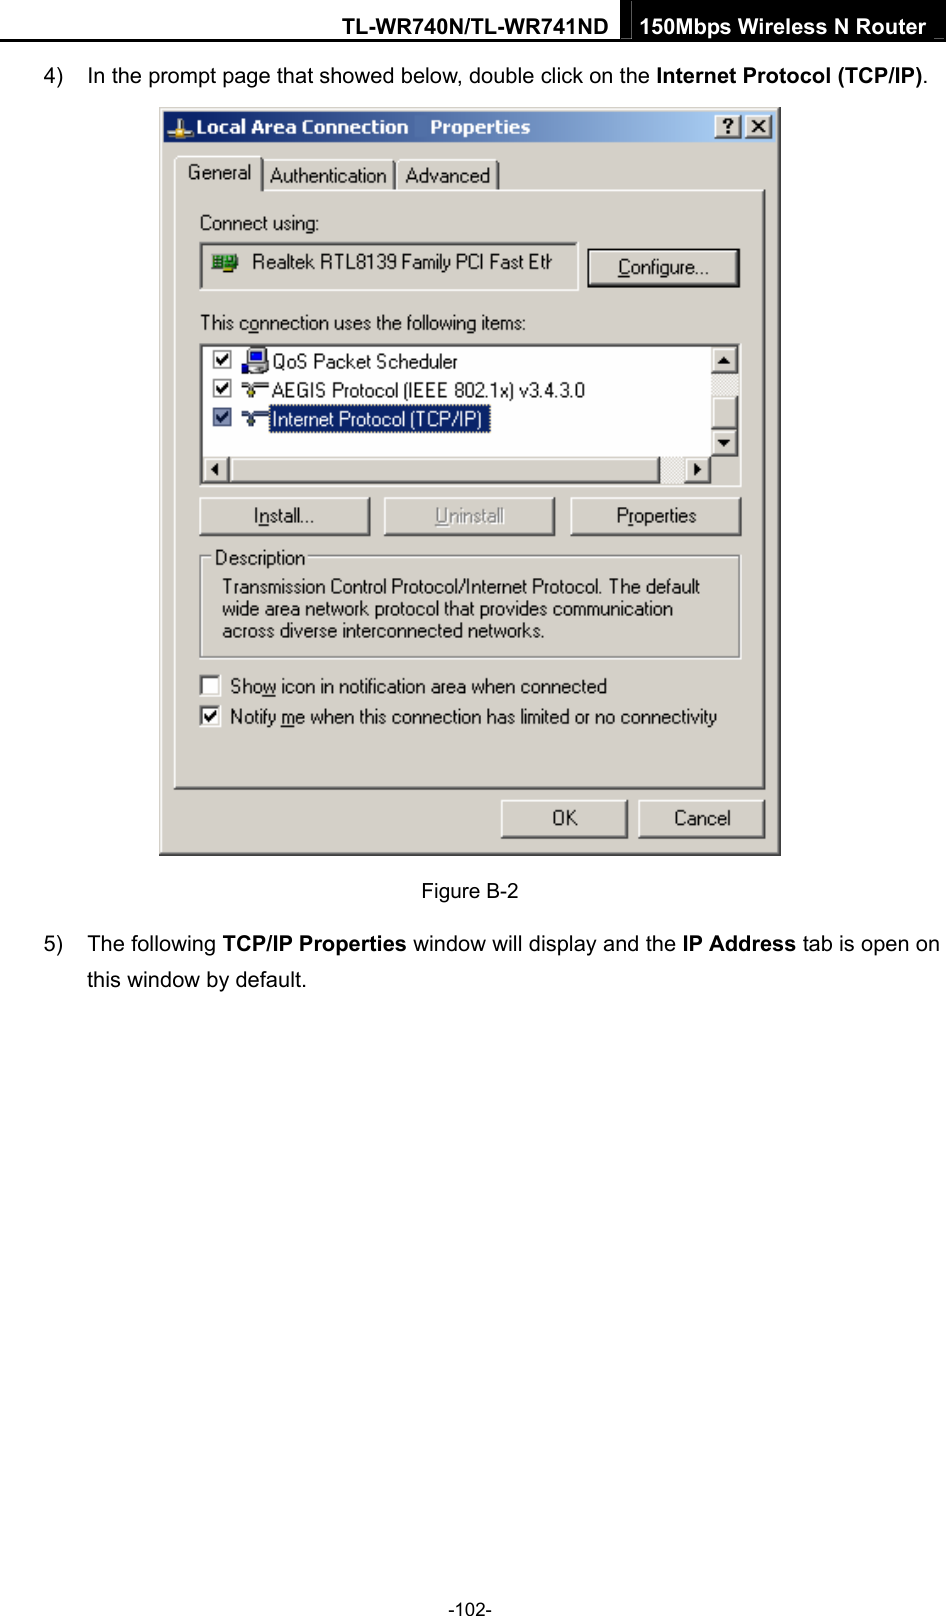 TL-WR740N/TL-WR741ND 150Mbps Wireless N Router  -102- 4)  In the prompt page that showed below, double click on the Internet Protocol (TCP/IP).  Figure B-2 5) The following TCP/IP Properties window will display and the IP Address tab is open on this window by default. 